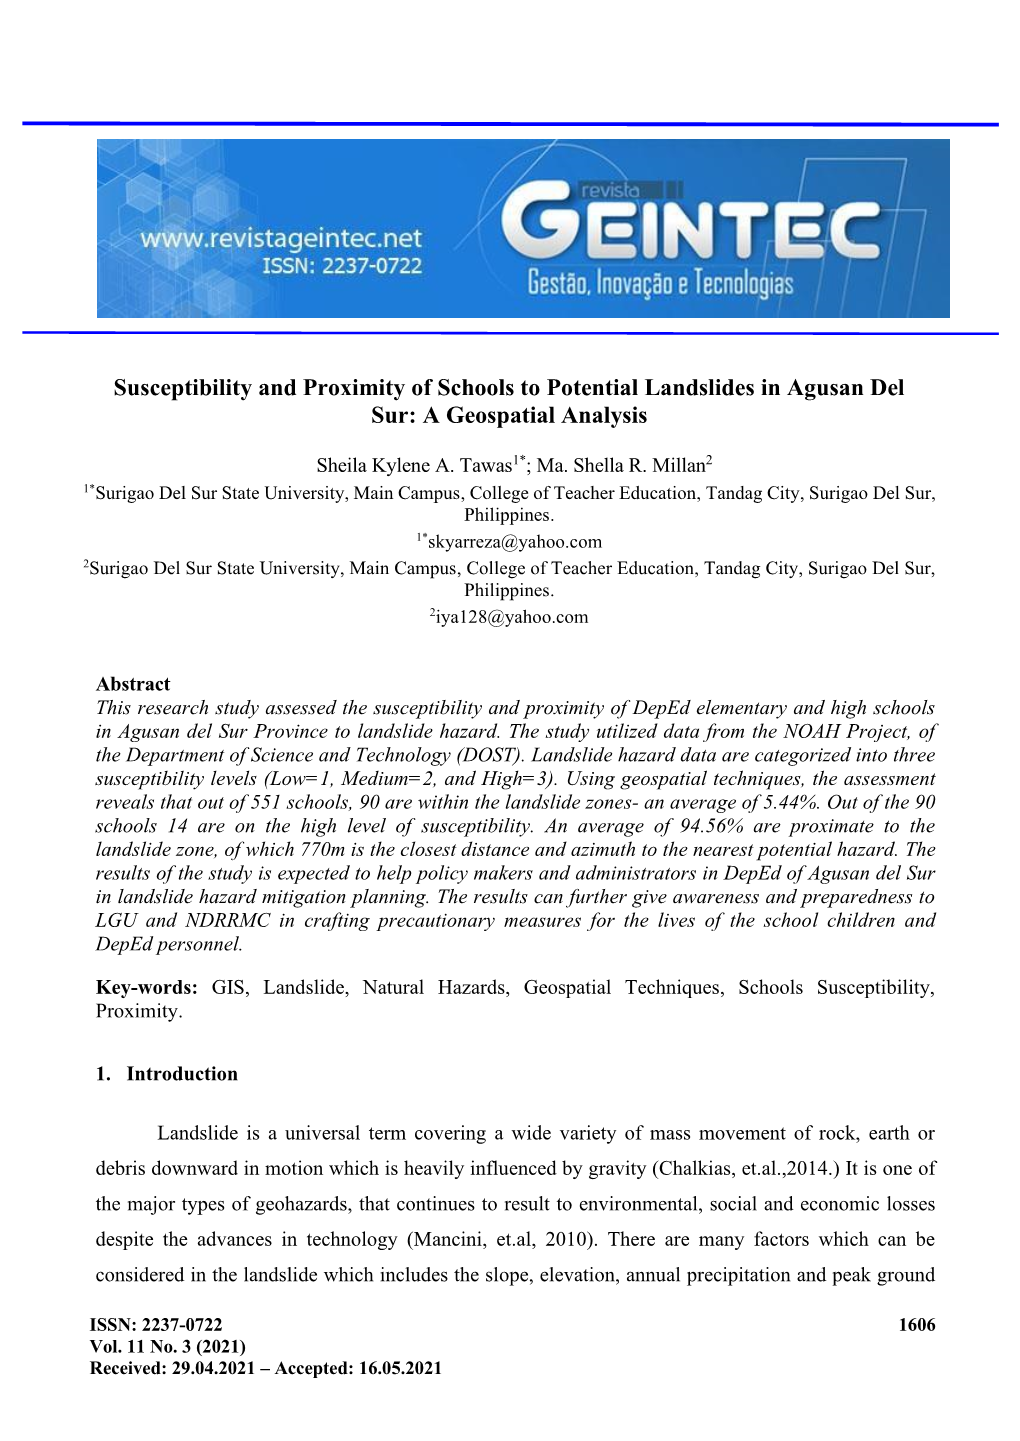 Susceptibility and Proximity of Schools to Potential Landslides in Agusan Del Sur: a Geospatial Analysis